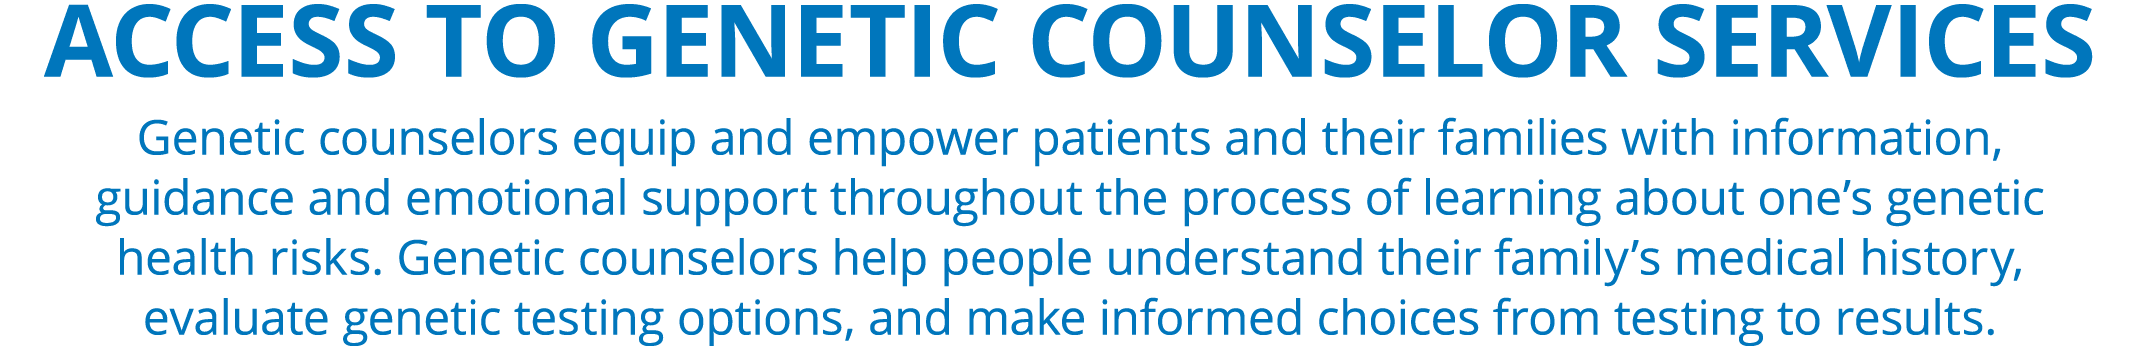 ACCESS TO GENETIC COUNSELOR SERVICES Genetic counselors equip and empower patients and their families with informatio...